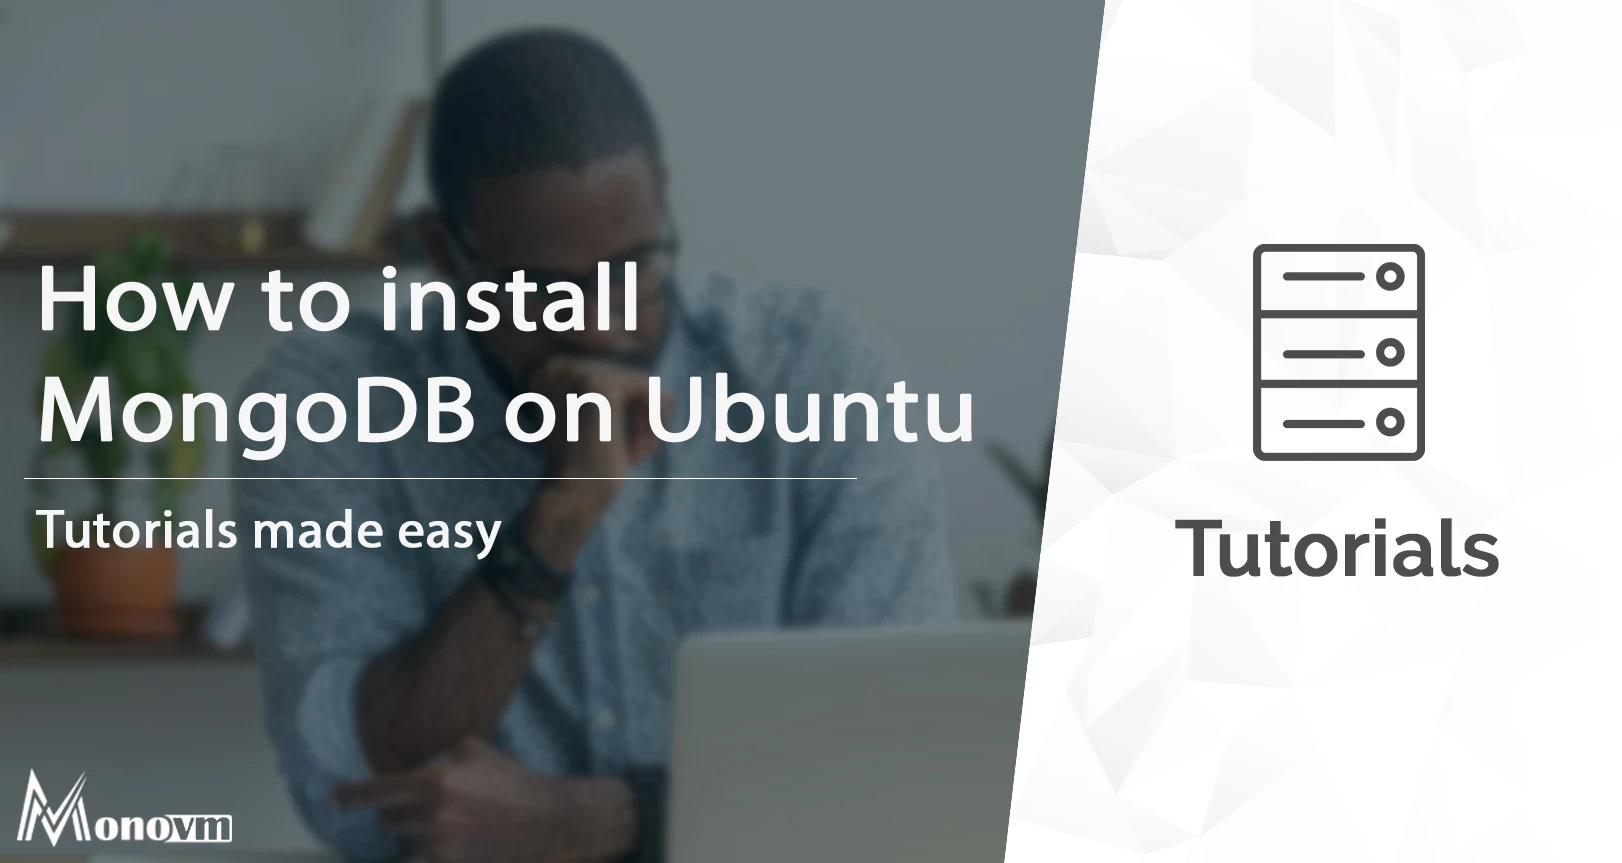 Step-by-Step Guide to Installing MongoDB on Ubuntu